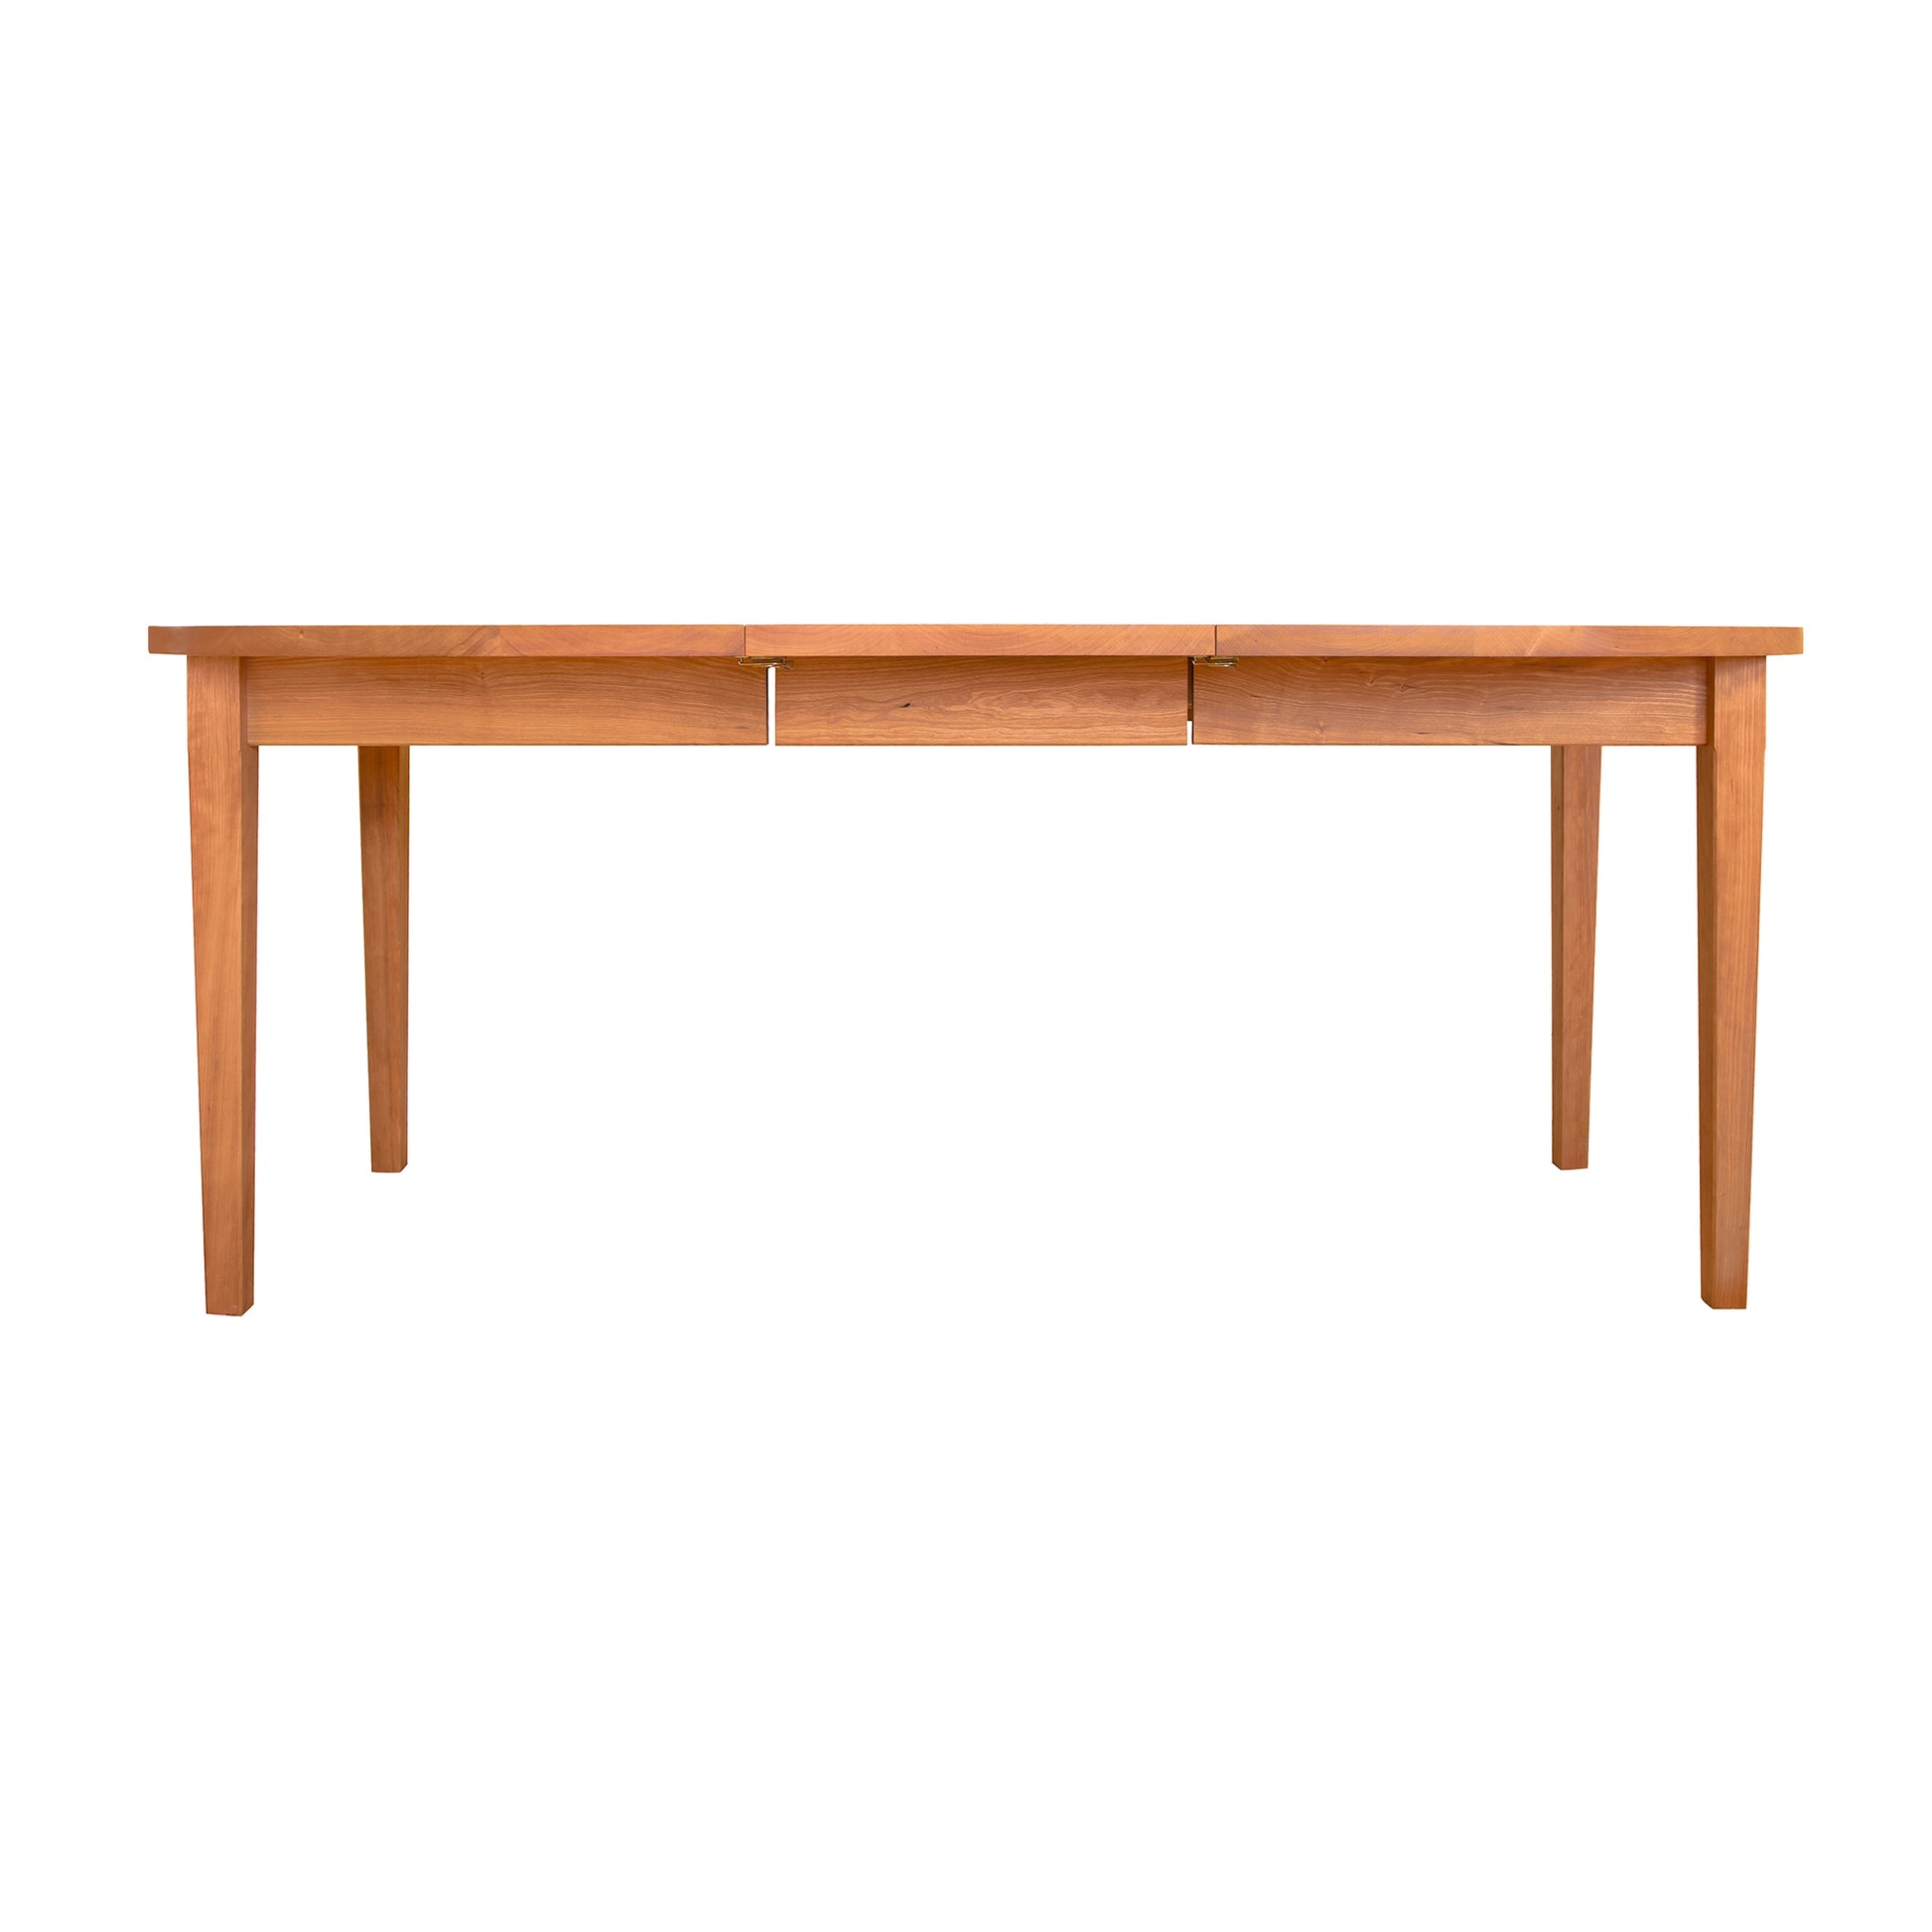 A Vermont Shaker Oval Extension Dining Table by Maple Corner Woodworks, with a simple wooden design and four legs, isolated on a clear white background.